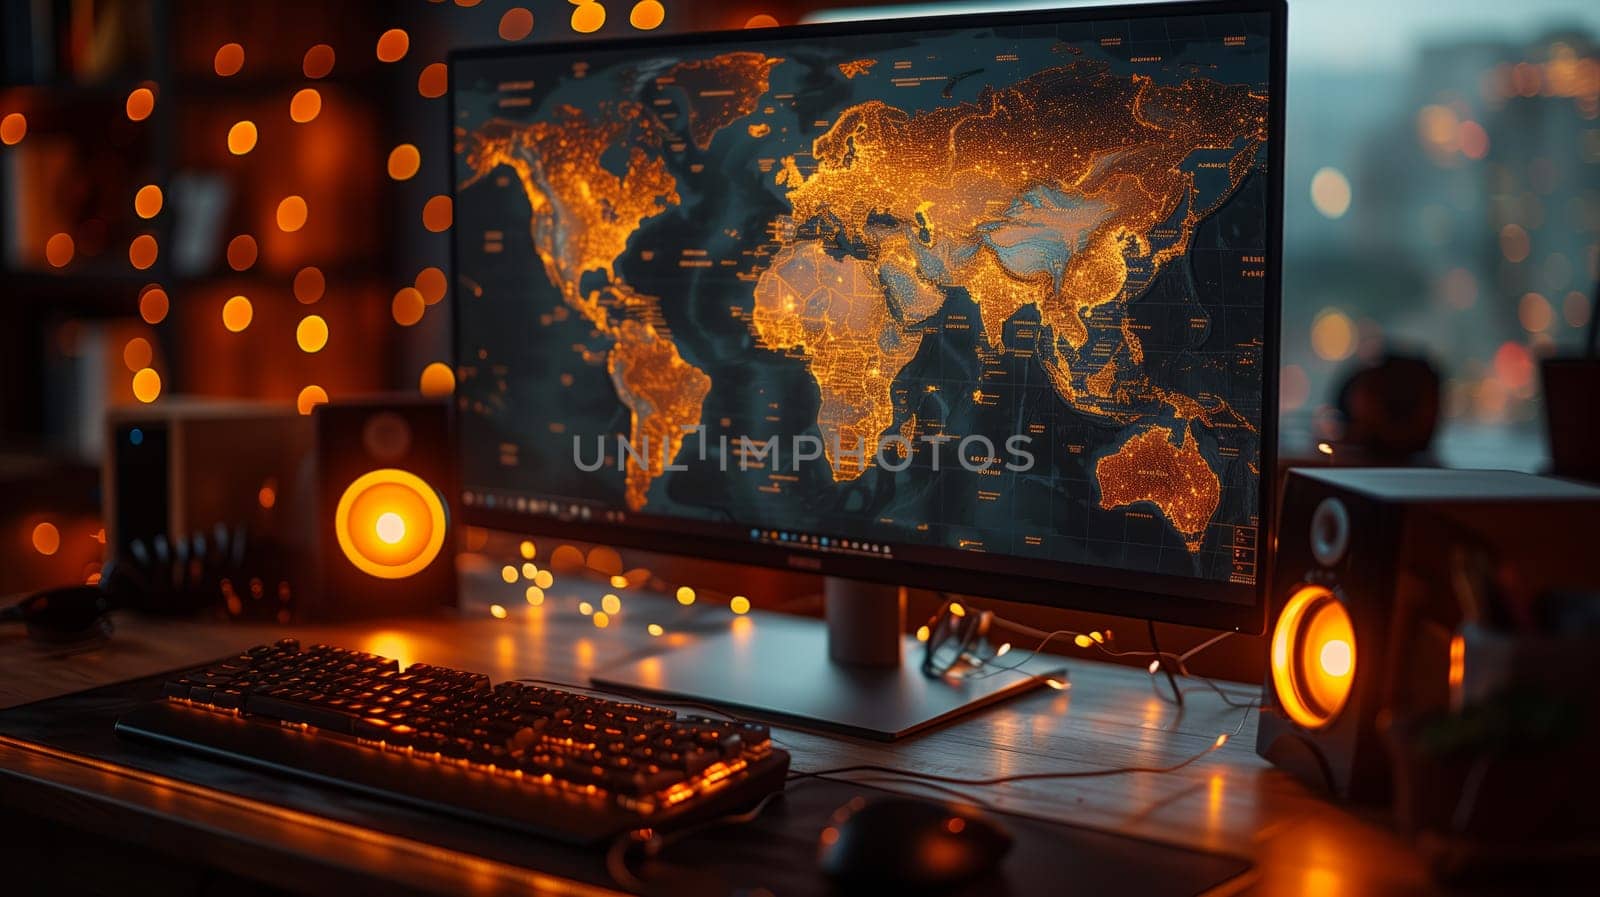 A display device showing a world map is placed on a desk in a building, with audio equipment for entertainment. The monitor can also be used for gaming